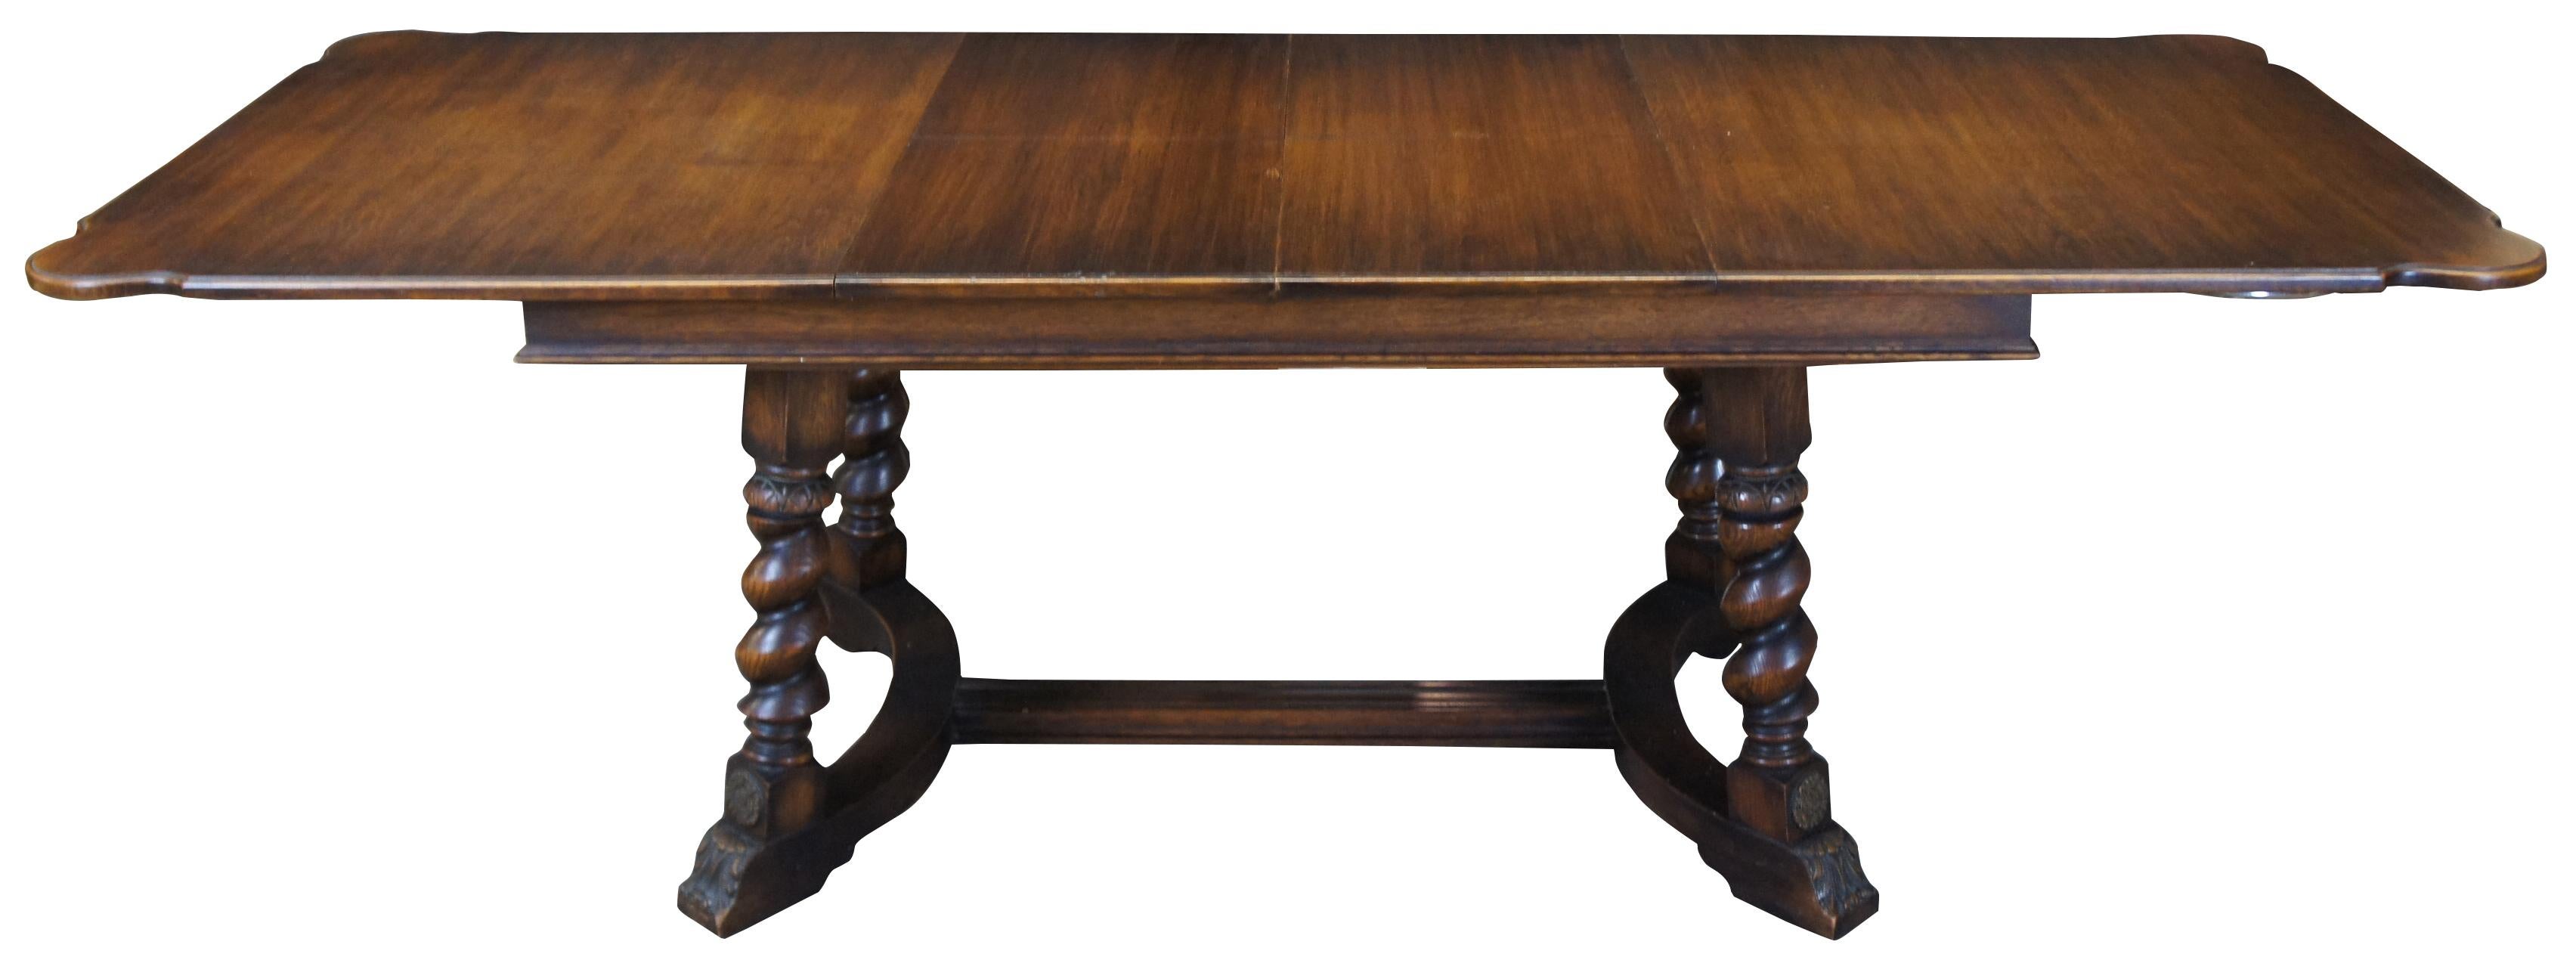 Early 20th century Jacobean inspired dining table. Made from oak with a rectangular top with rounded corners. Over four turned barley twist legs, leading to an acanthus feet connected by H stretcher / trestle base. The table expands with a unique